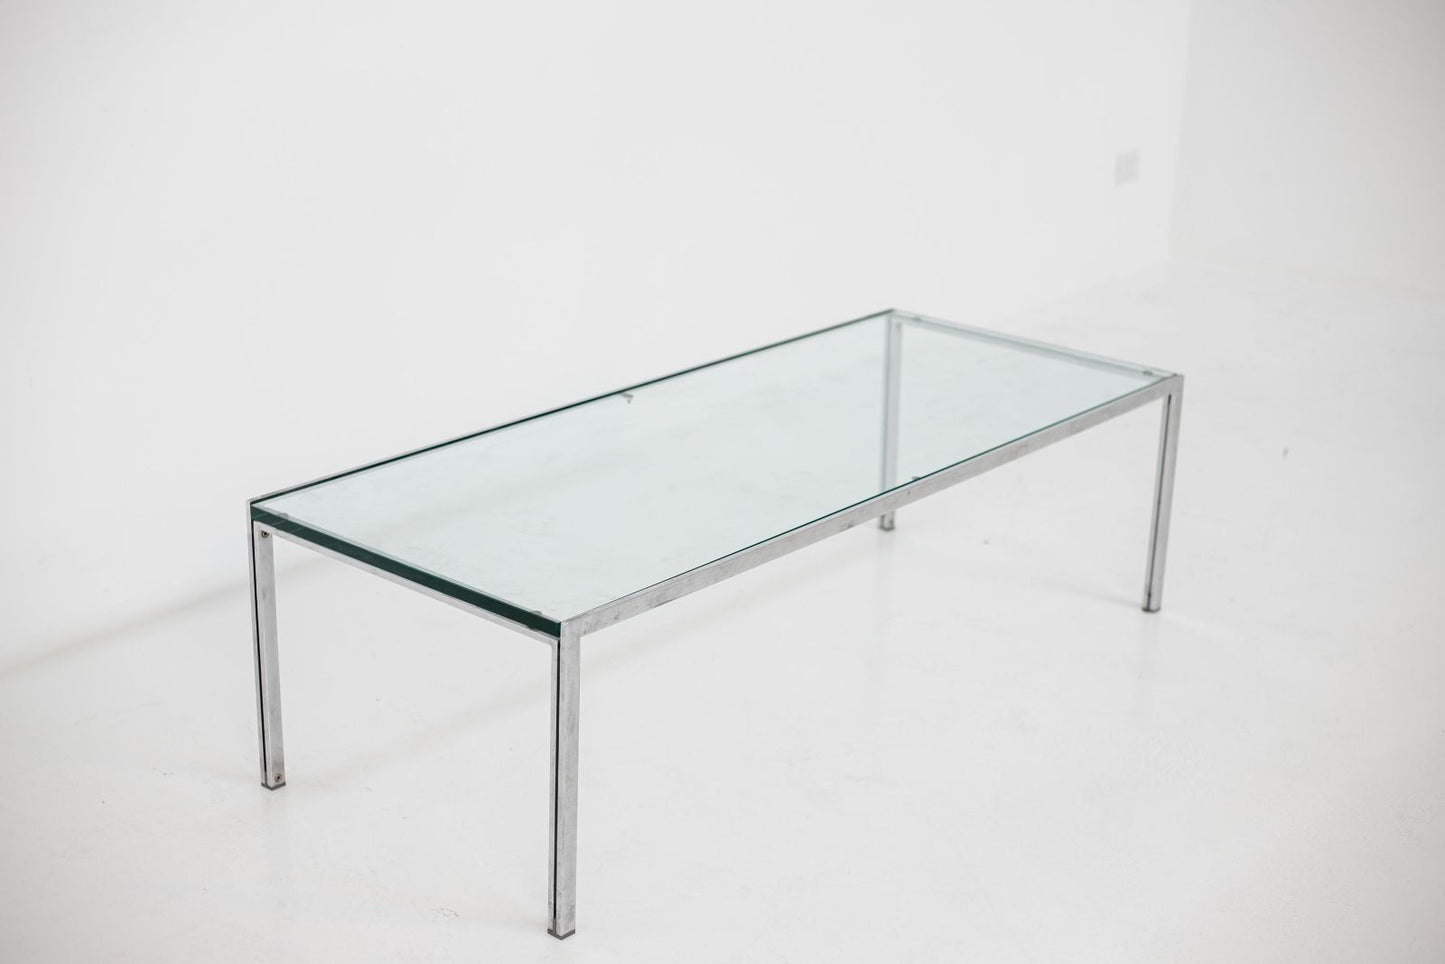 Low Living Room Table by Ross Littell for Depadova, 60s